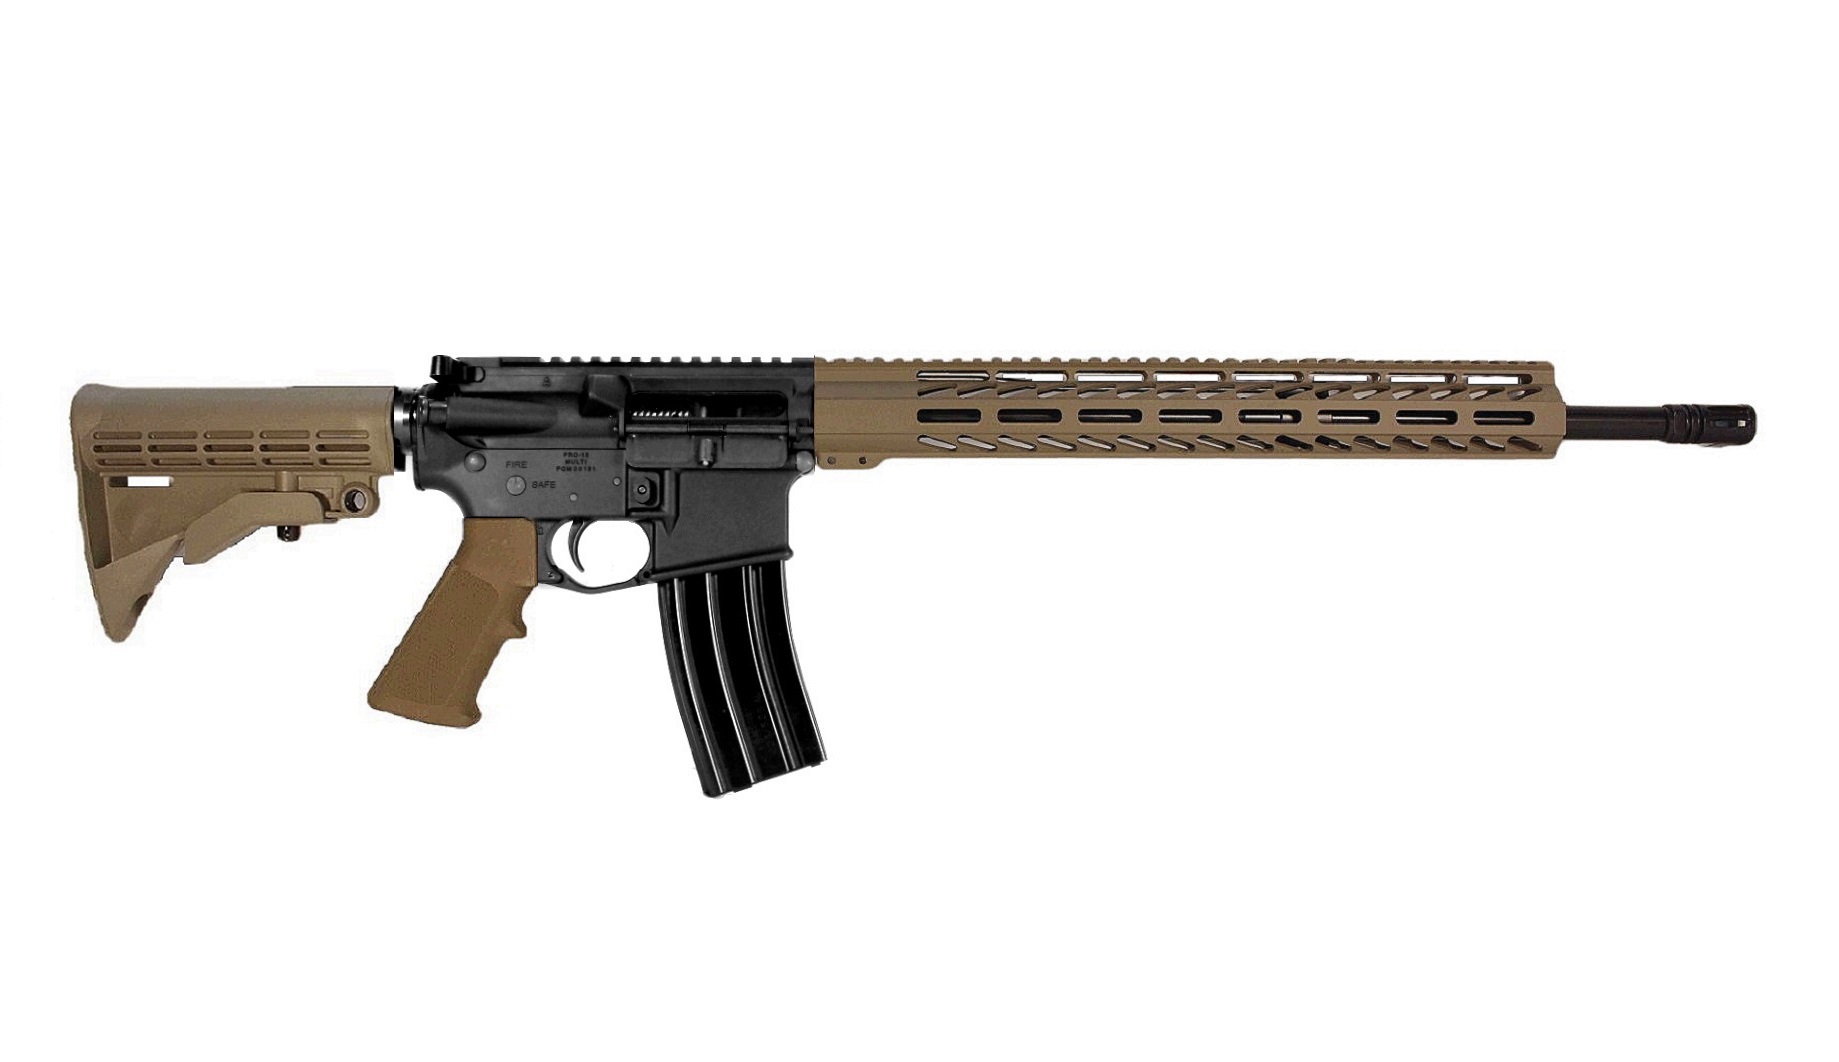 16 inch 50 Beowulf AR-15 Rifle in BLK/FDE